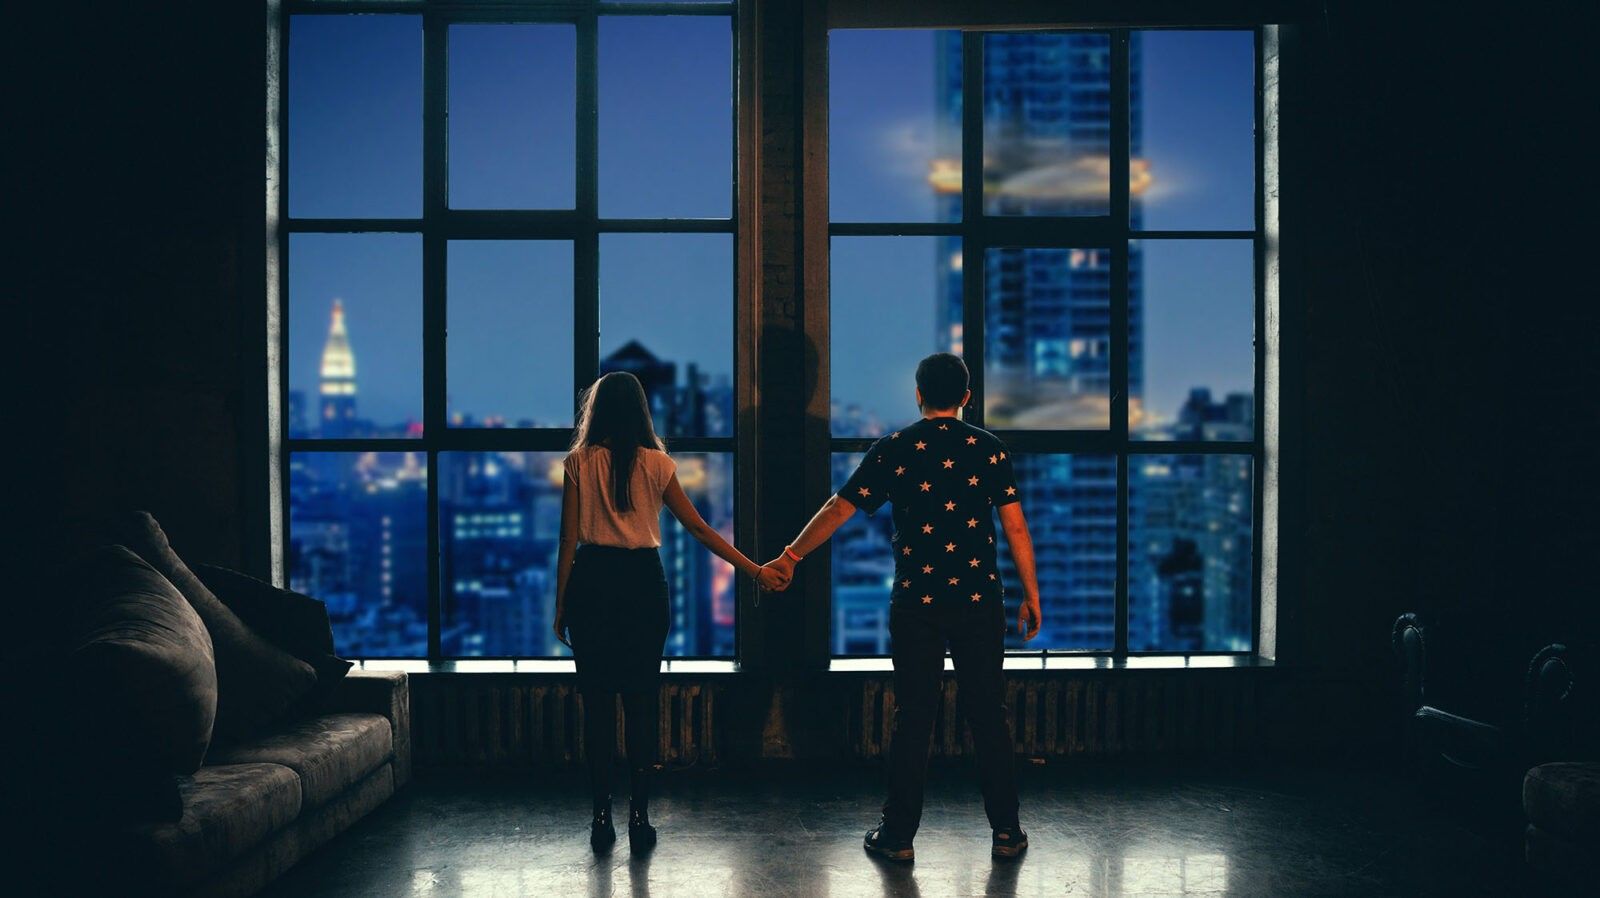 Couple in front of window holding hands